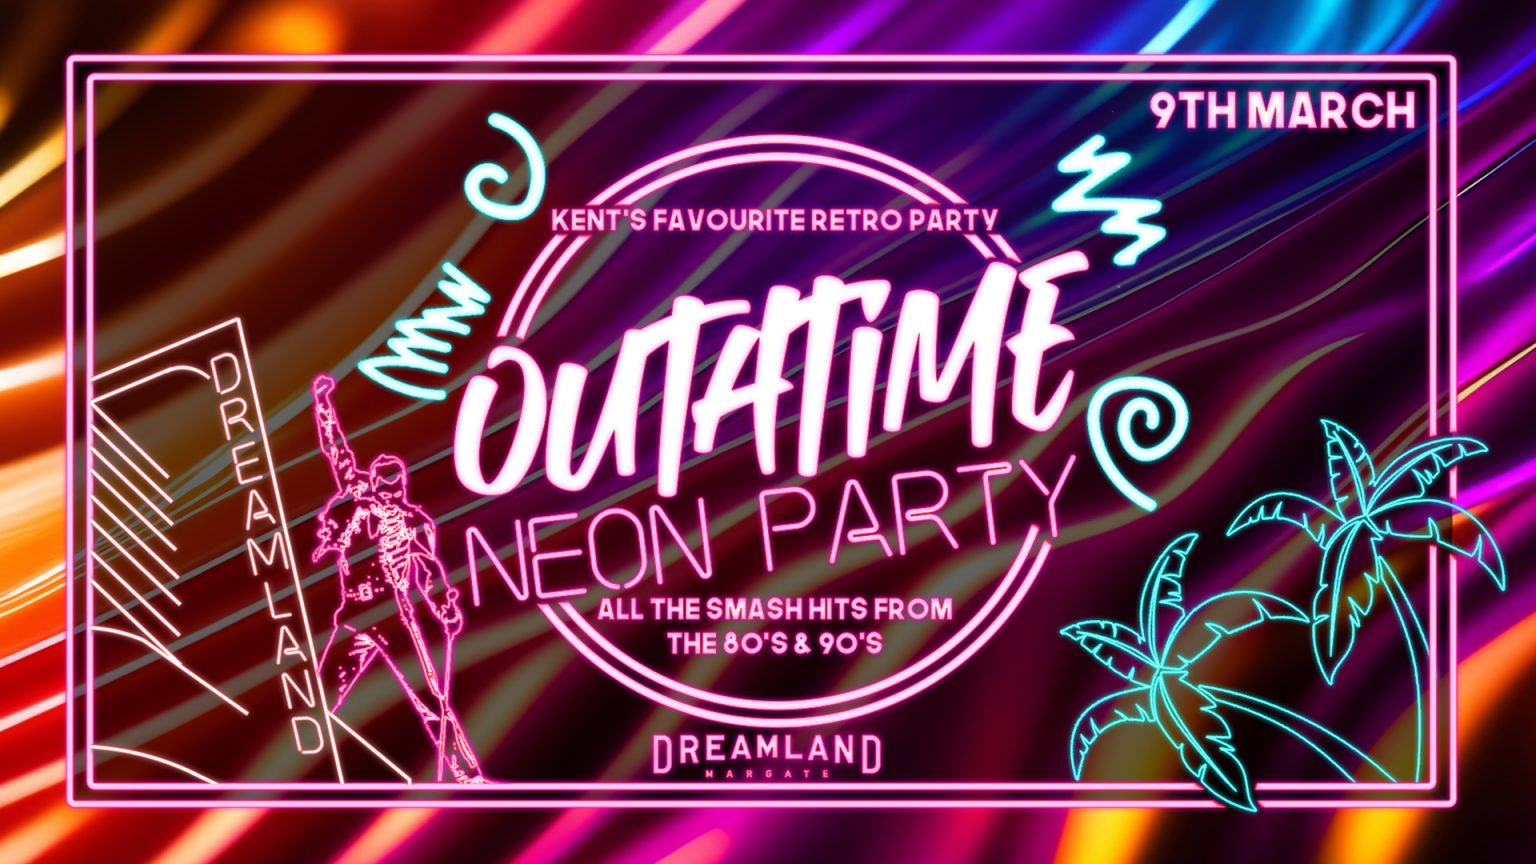 Outatime: Neon Party